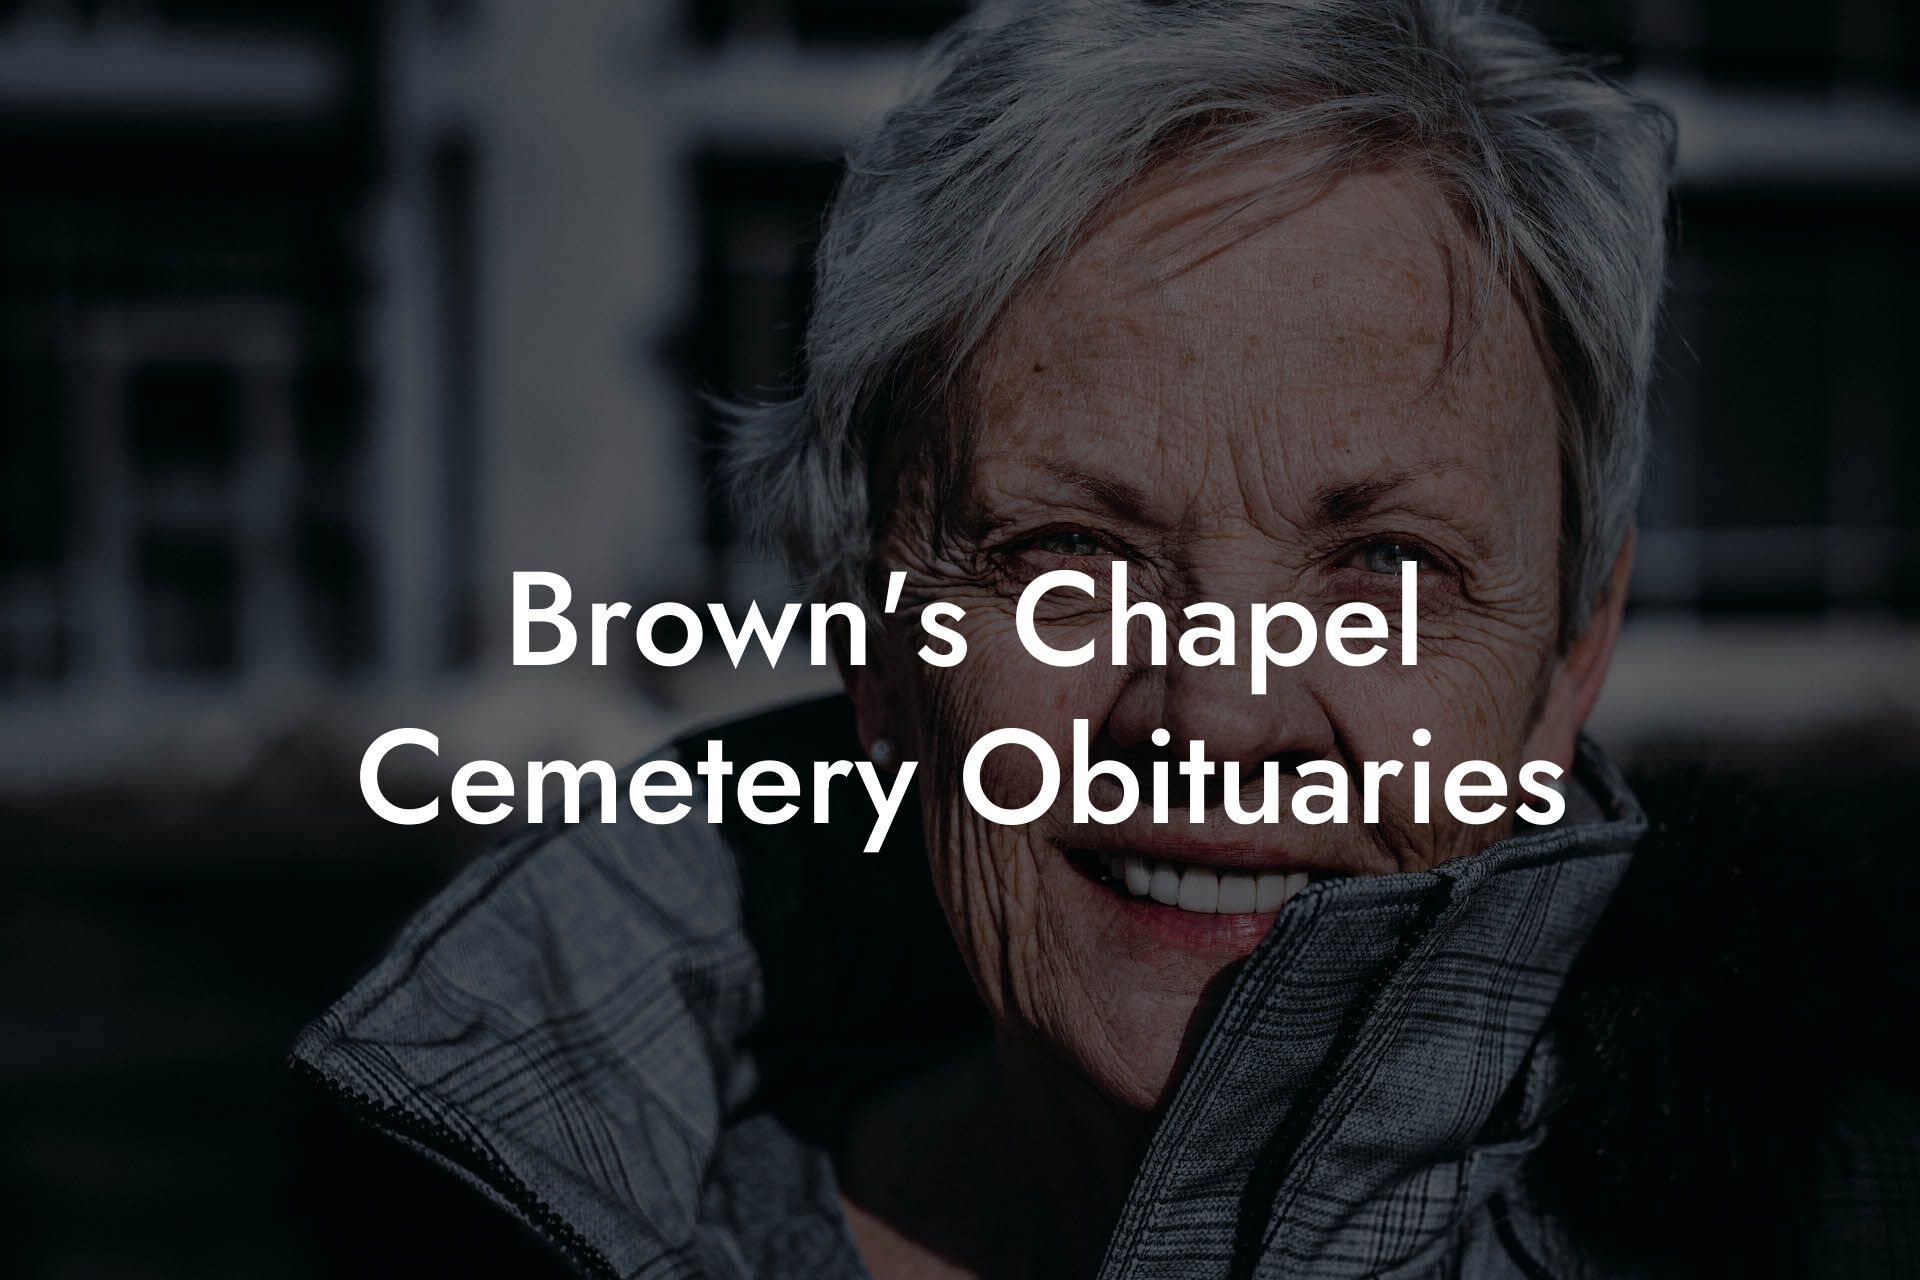 Brown's Chapel Cemetery Obituaries